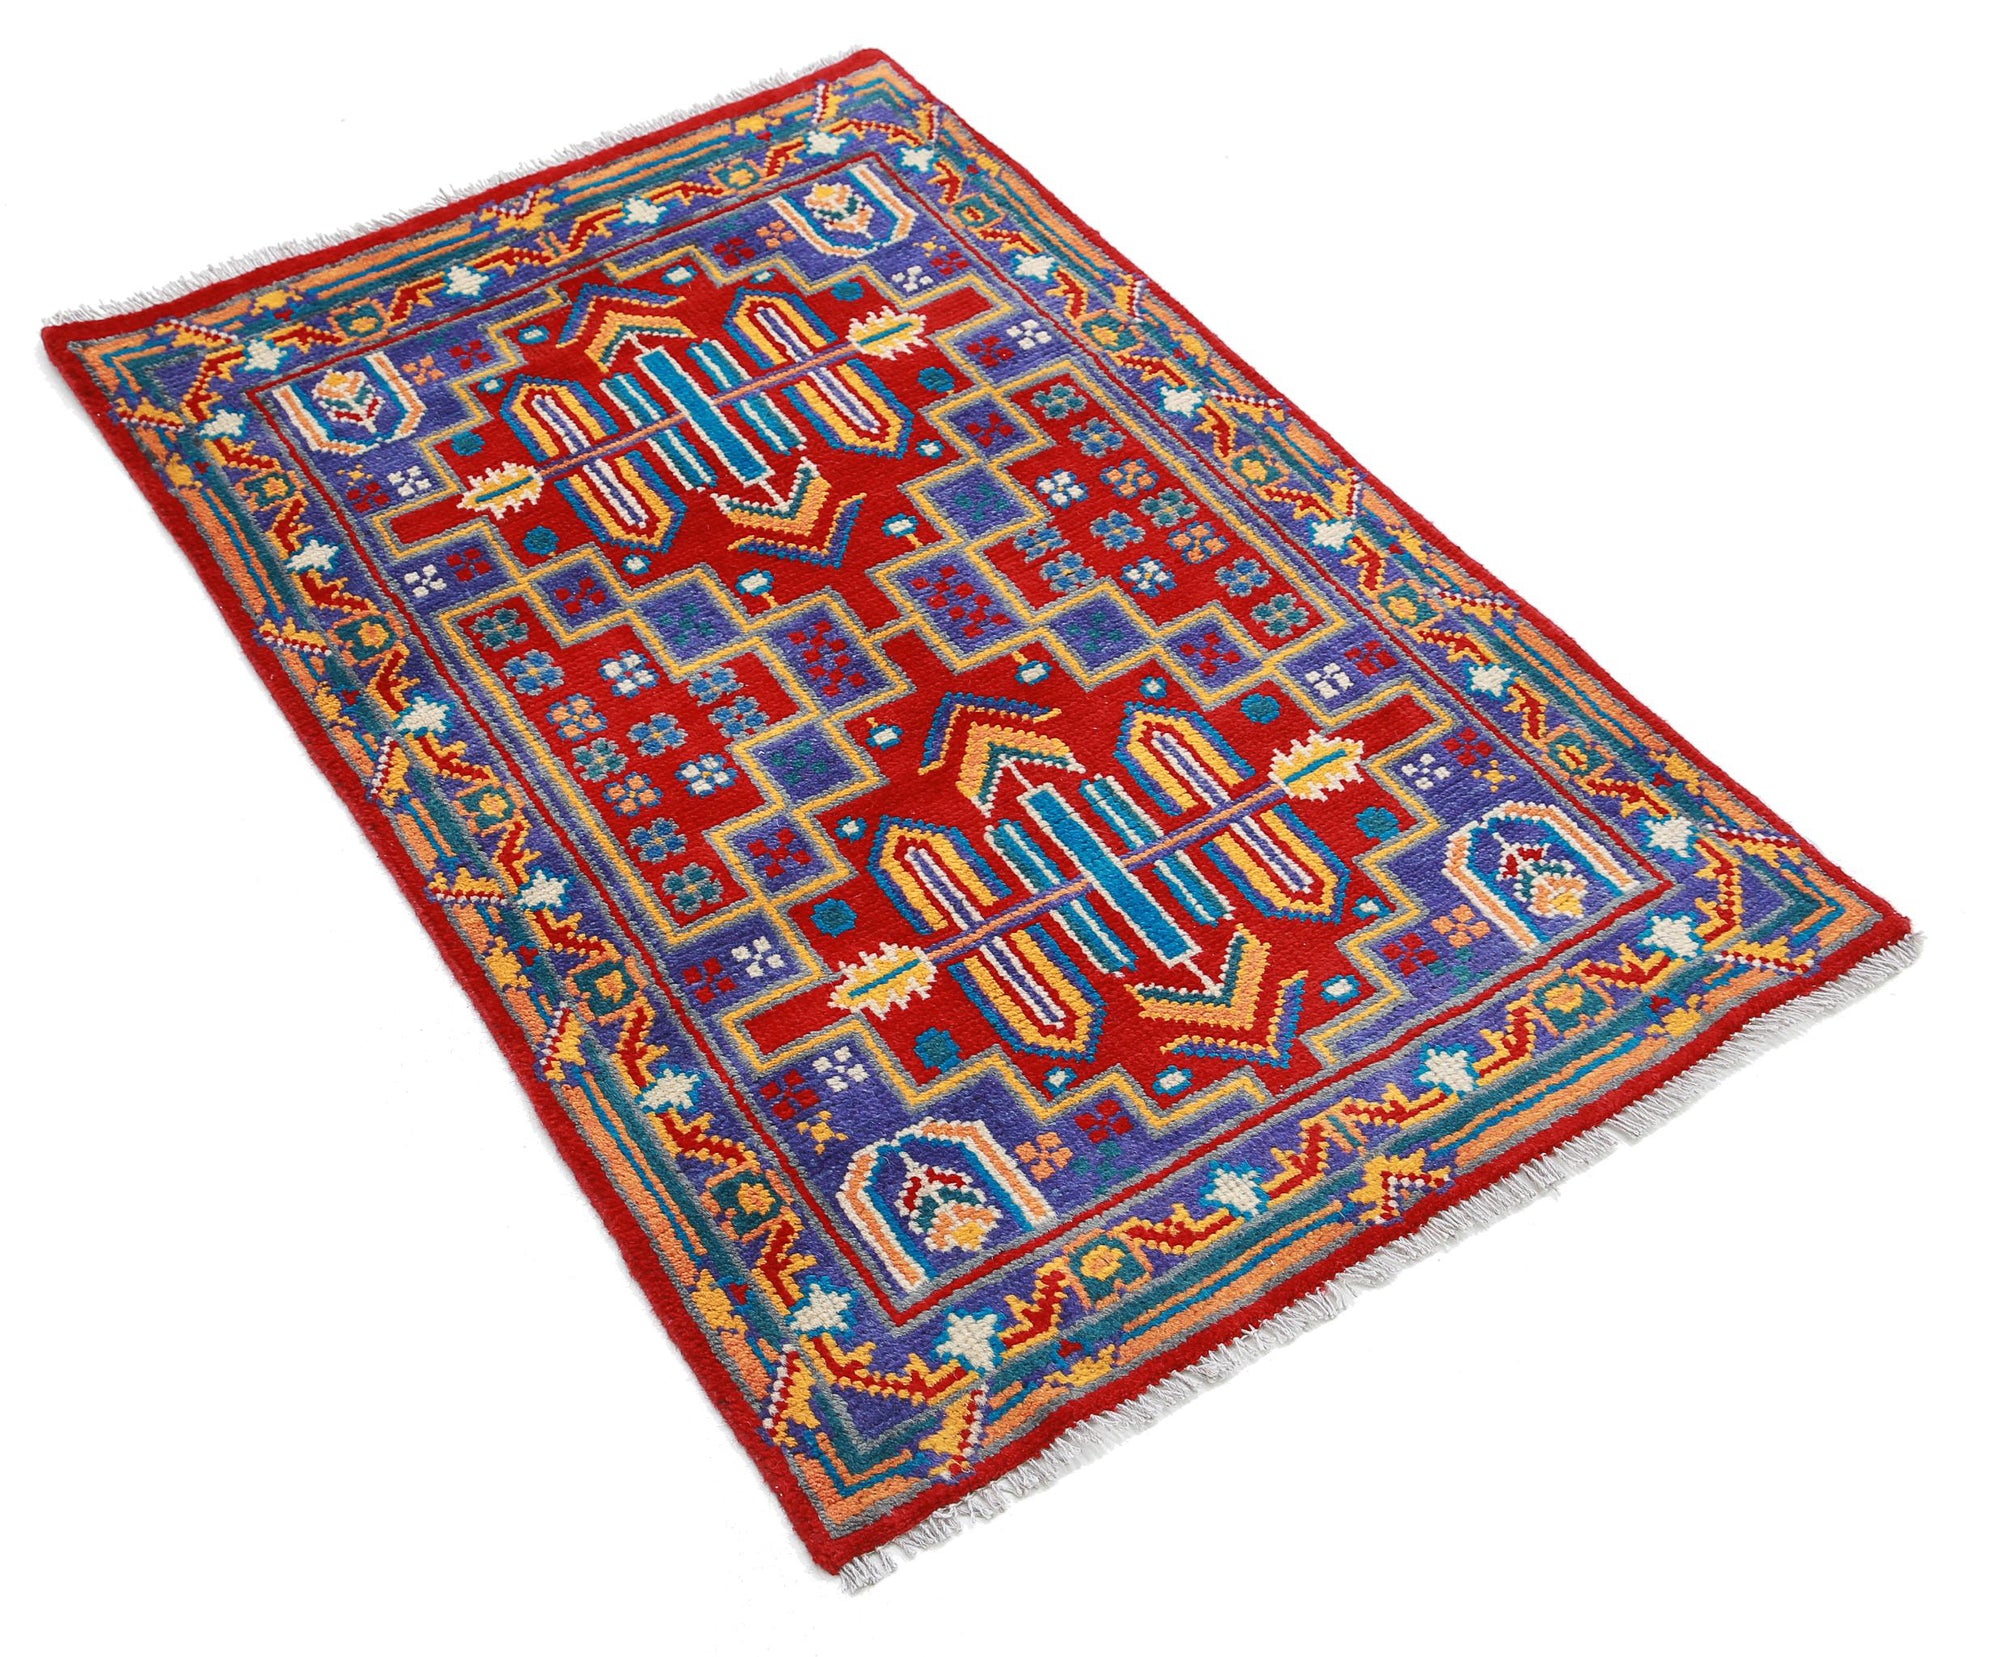 Revival-hand-knotted-qarghani-wool-rug-5014191-1.jpg